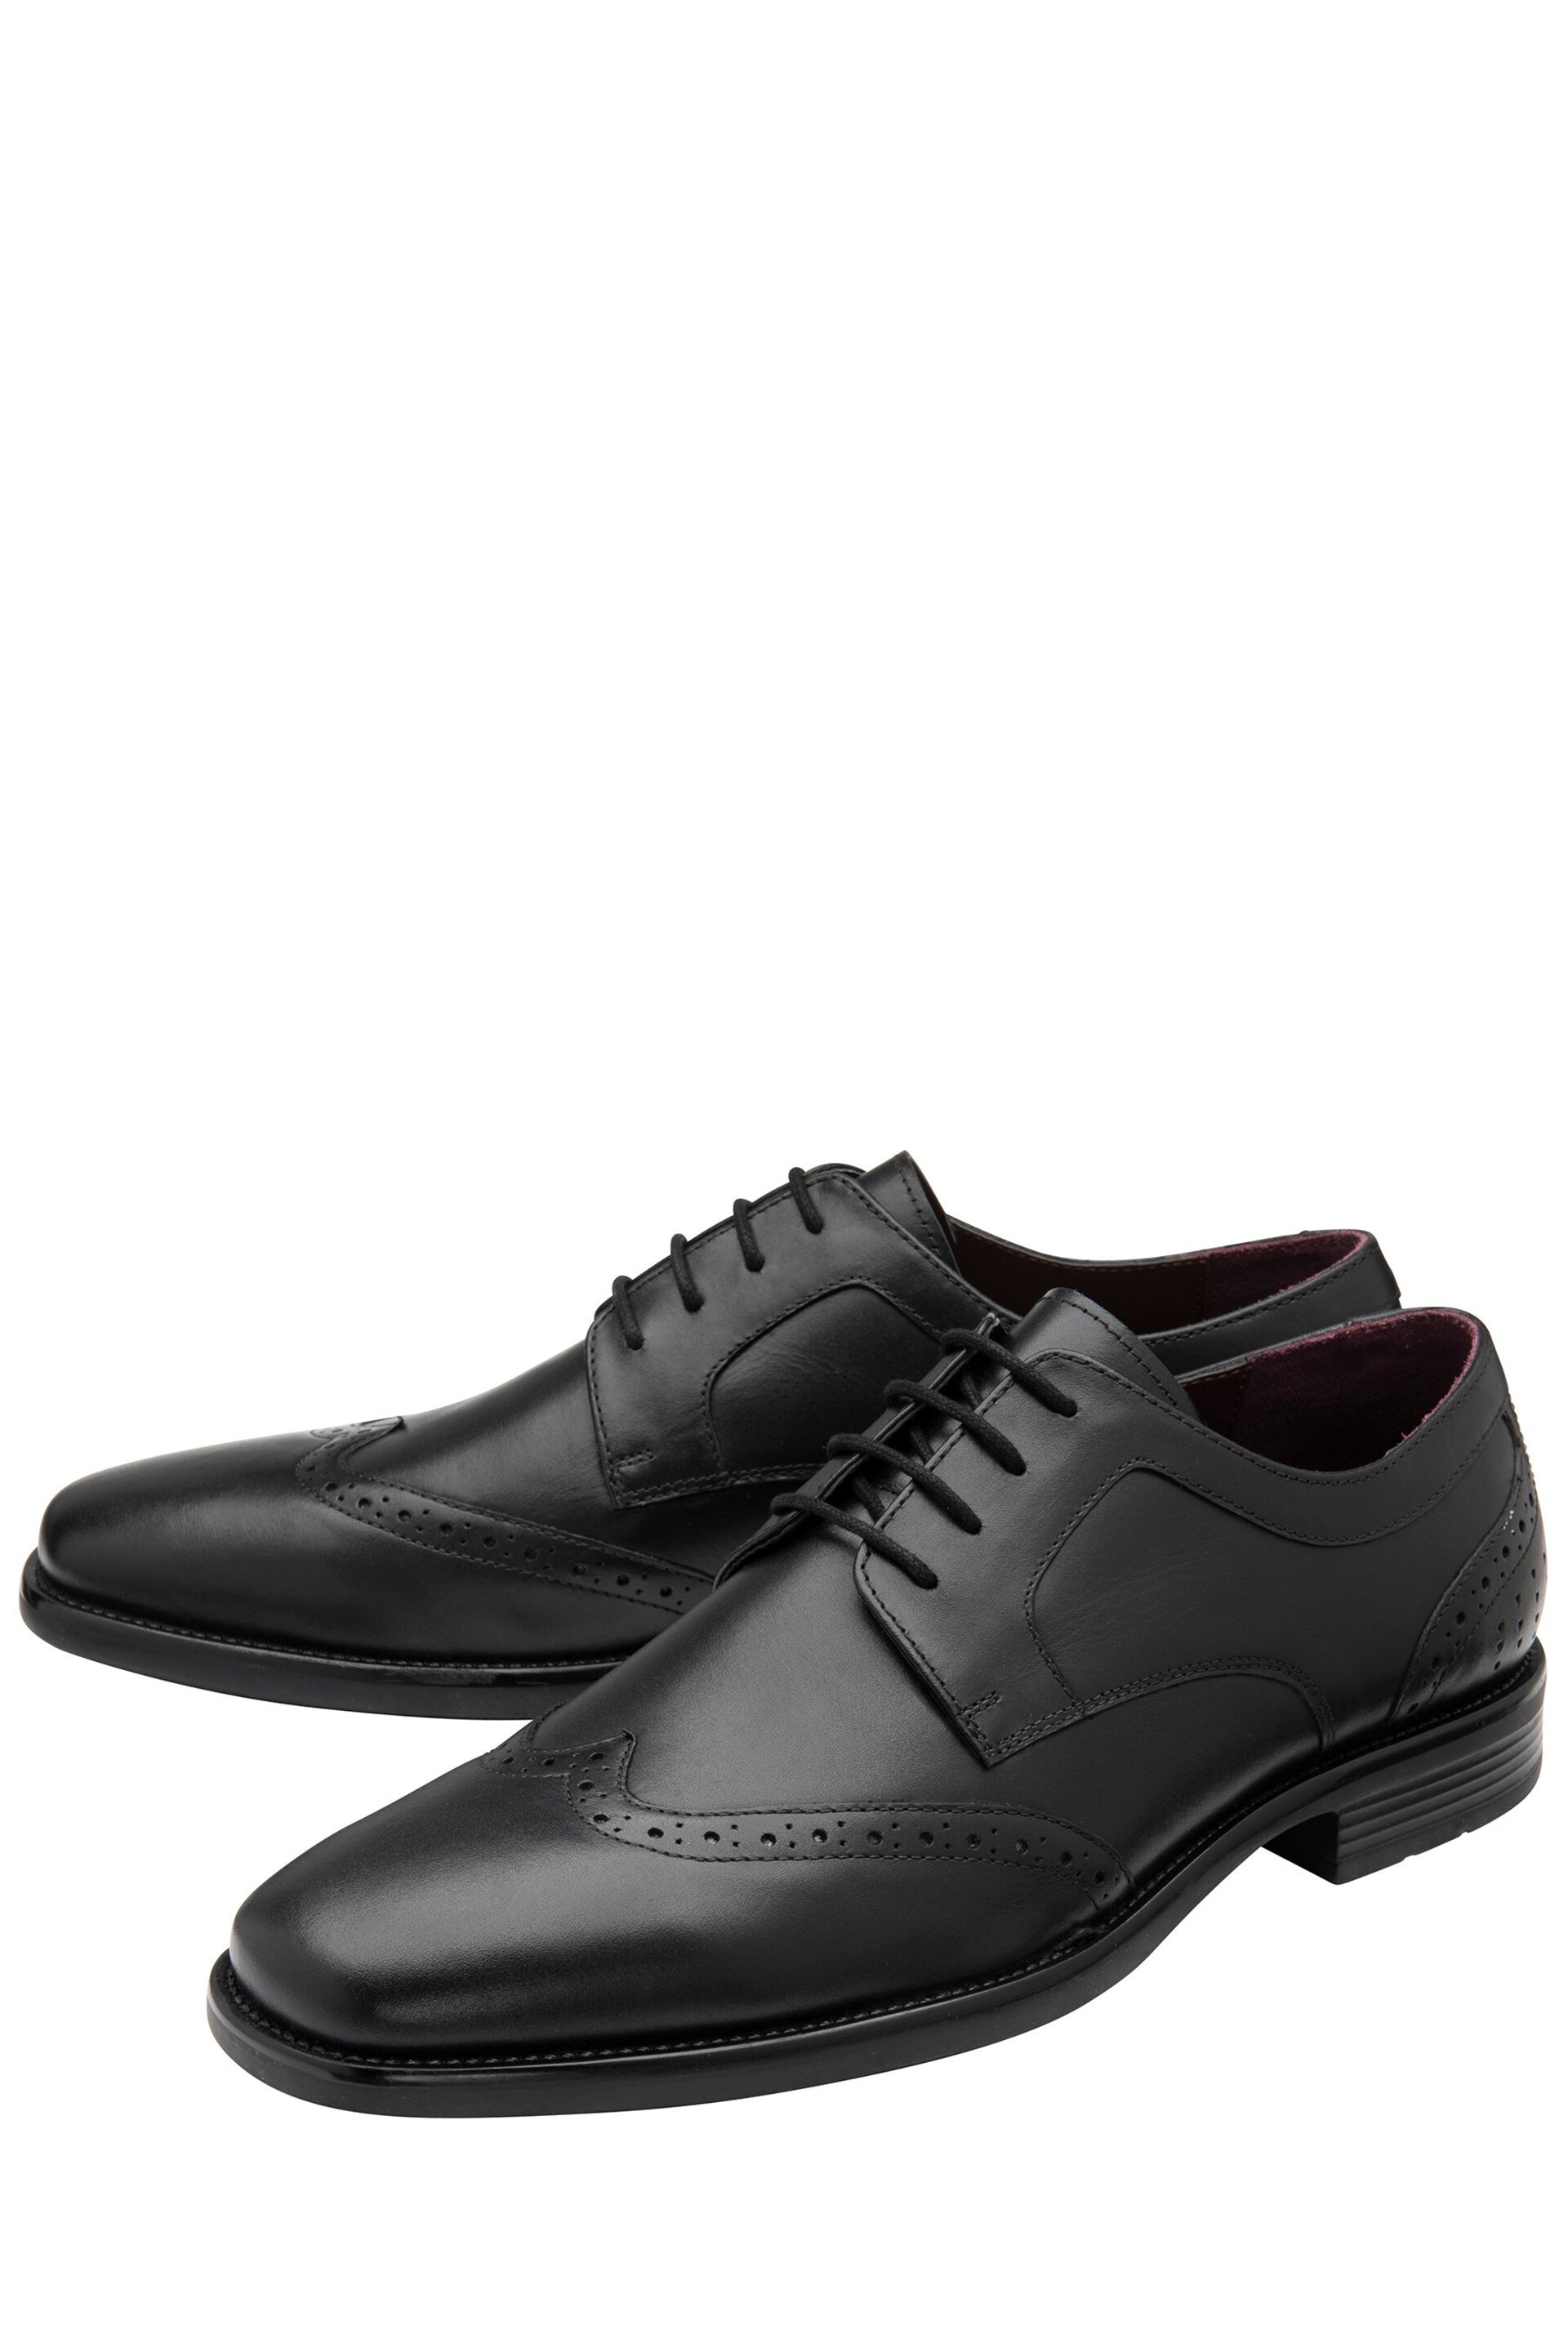 Lotus Black Leather Lace-Up Brogues - Image 2 of 4